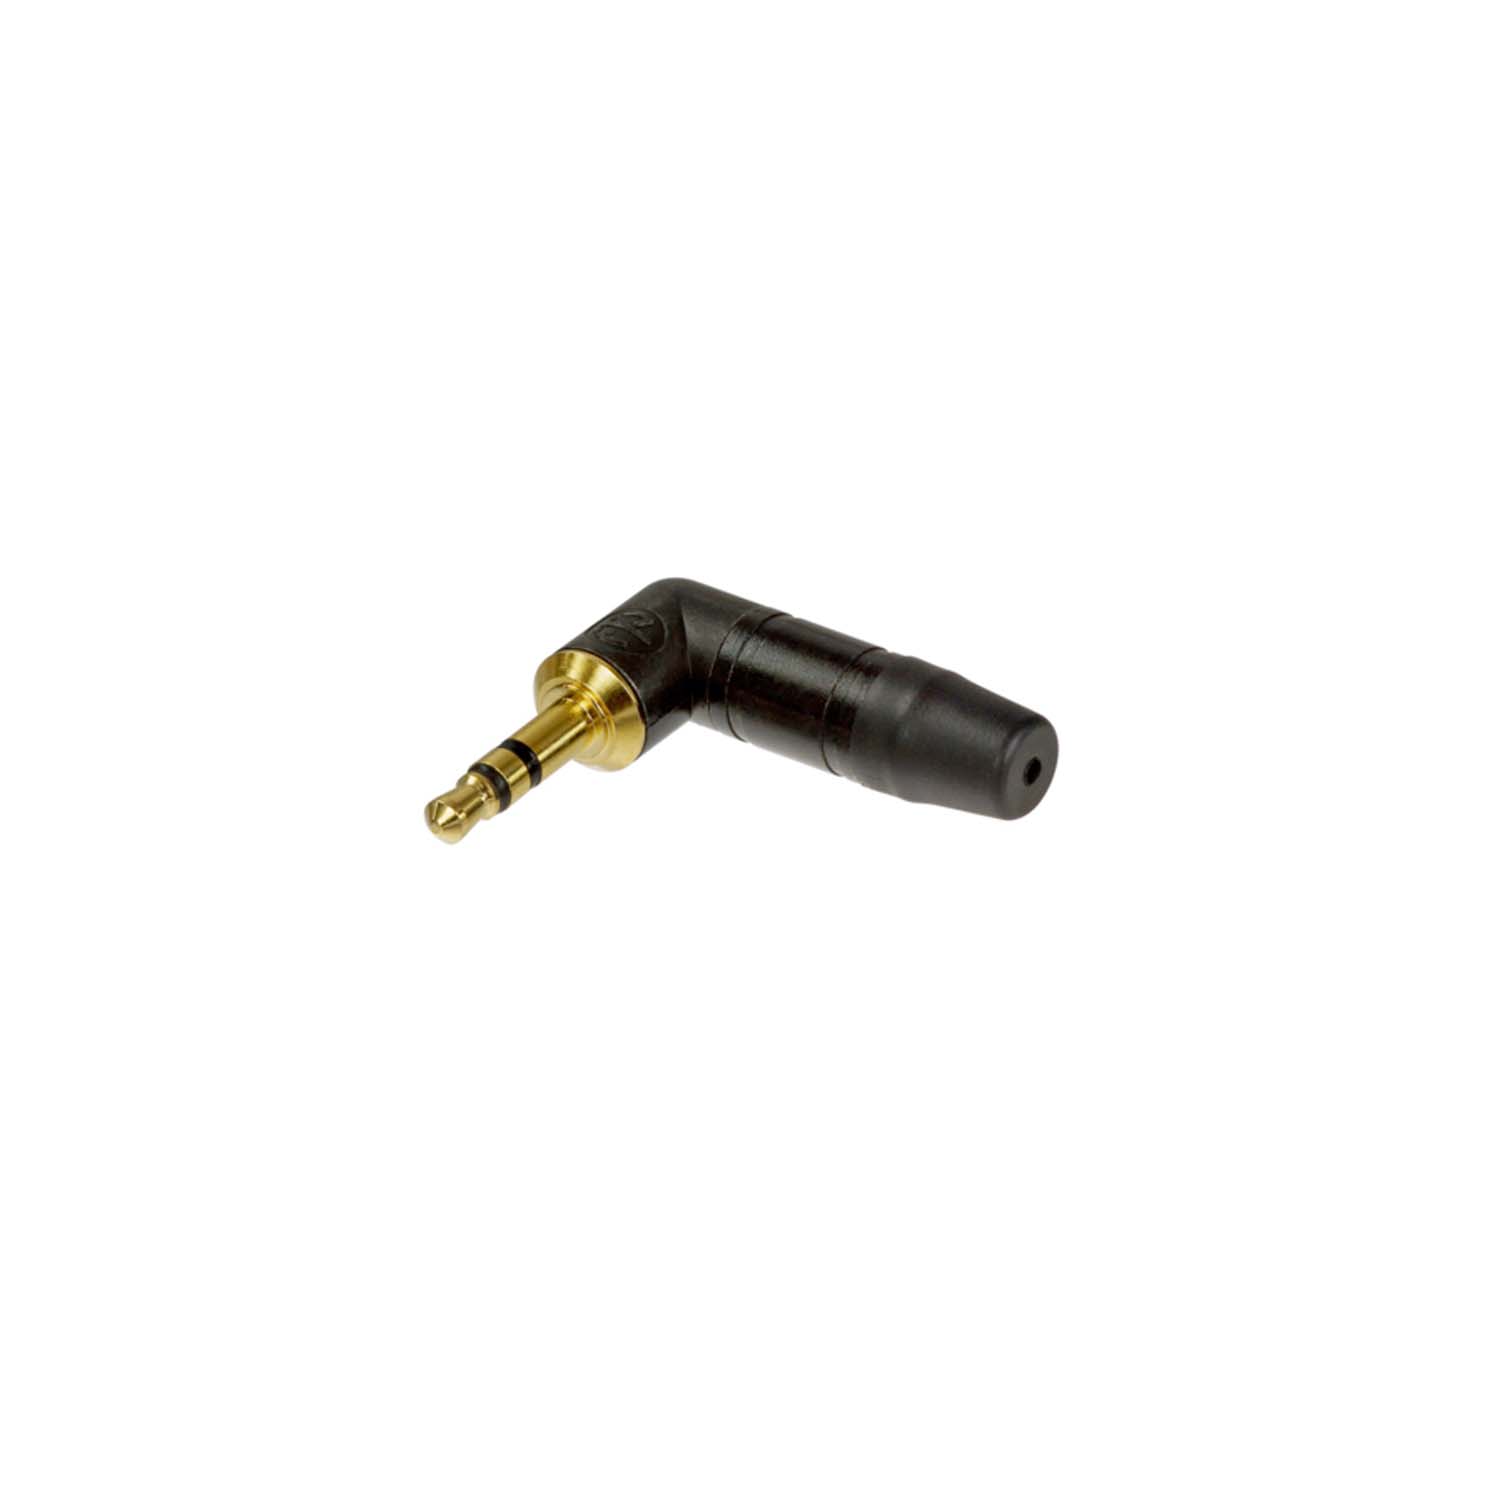 Neutrik 3.5mm Right Angle Stereo Plug Black with Gold Pins